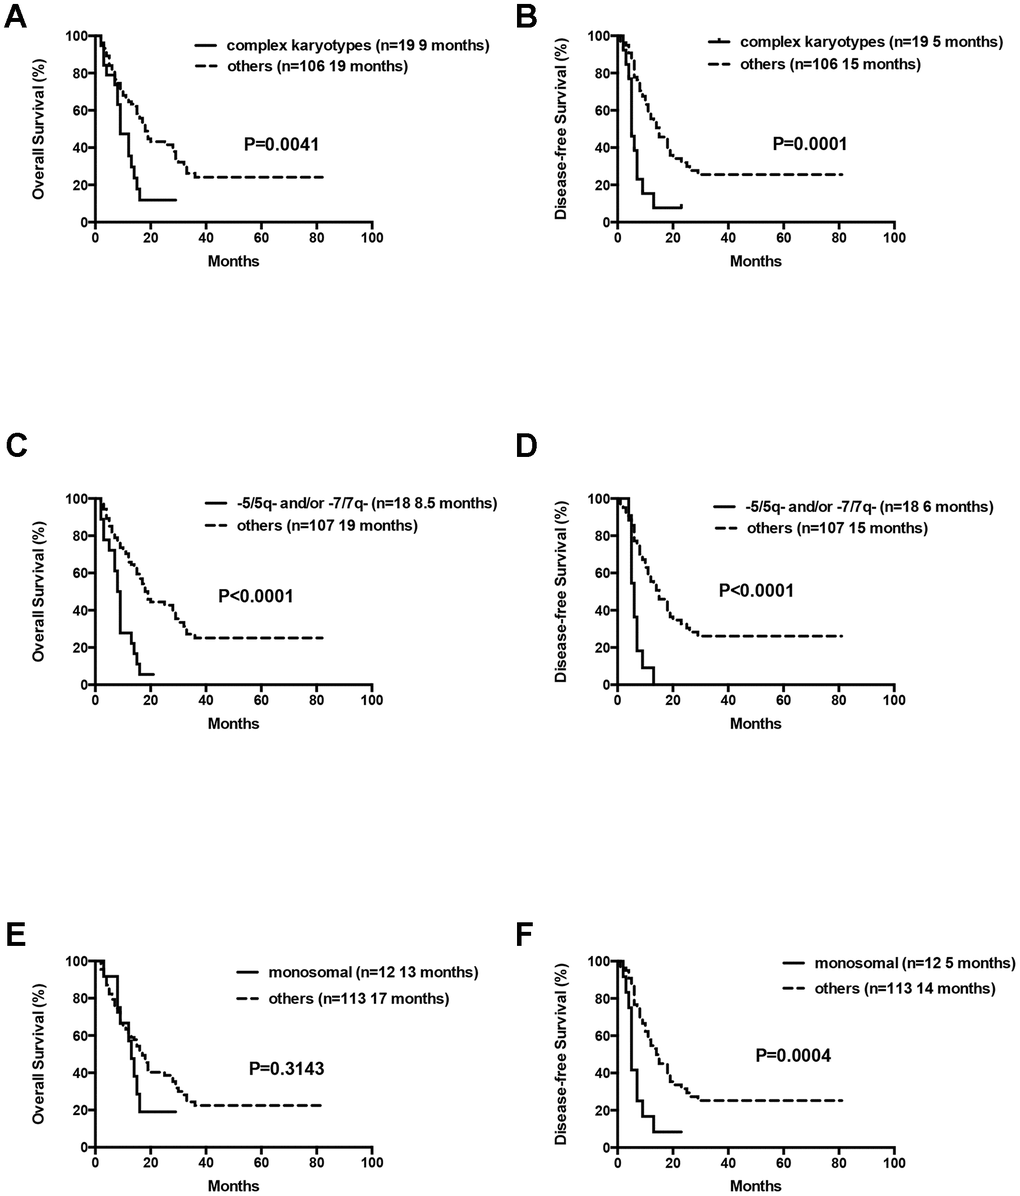 Overall survival and disease free survival according to cytogenetics. (A) Overall survival in AML patients with complex cytogenetics compared to others. (B) Disease free survival in AML patients with complex cytogenetics compared to others. (C) Overall survival in AML patients with abnormalities in -5/5q- and/or -7/7q- chromosomal deletions compared to others. (D) Disease free survival in AML patients with abnormalities in -5/5q- and/or -7/7q- chromosomal deletions compared to others. (E) Overall survival in AML patients with monosomal karyotype compared to others. (F) Disease free survival in AML patients with monosomal karyotype compared to others.